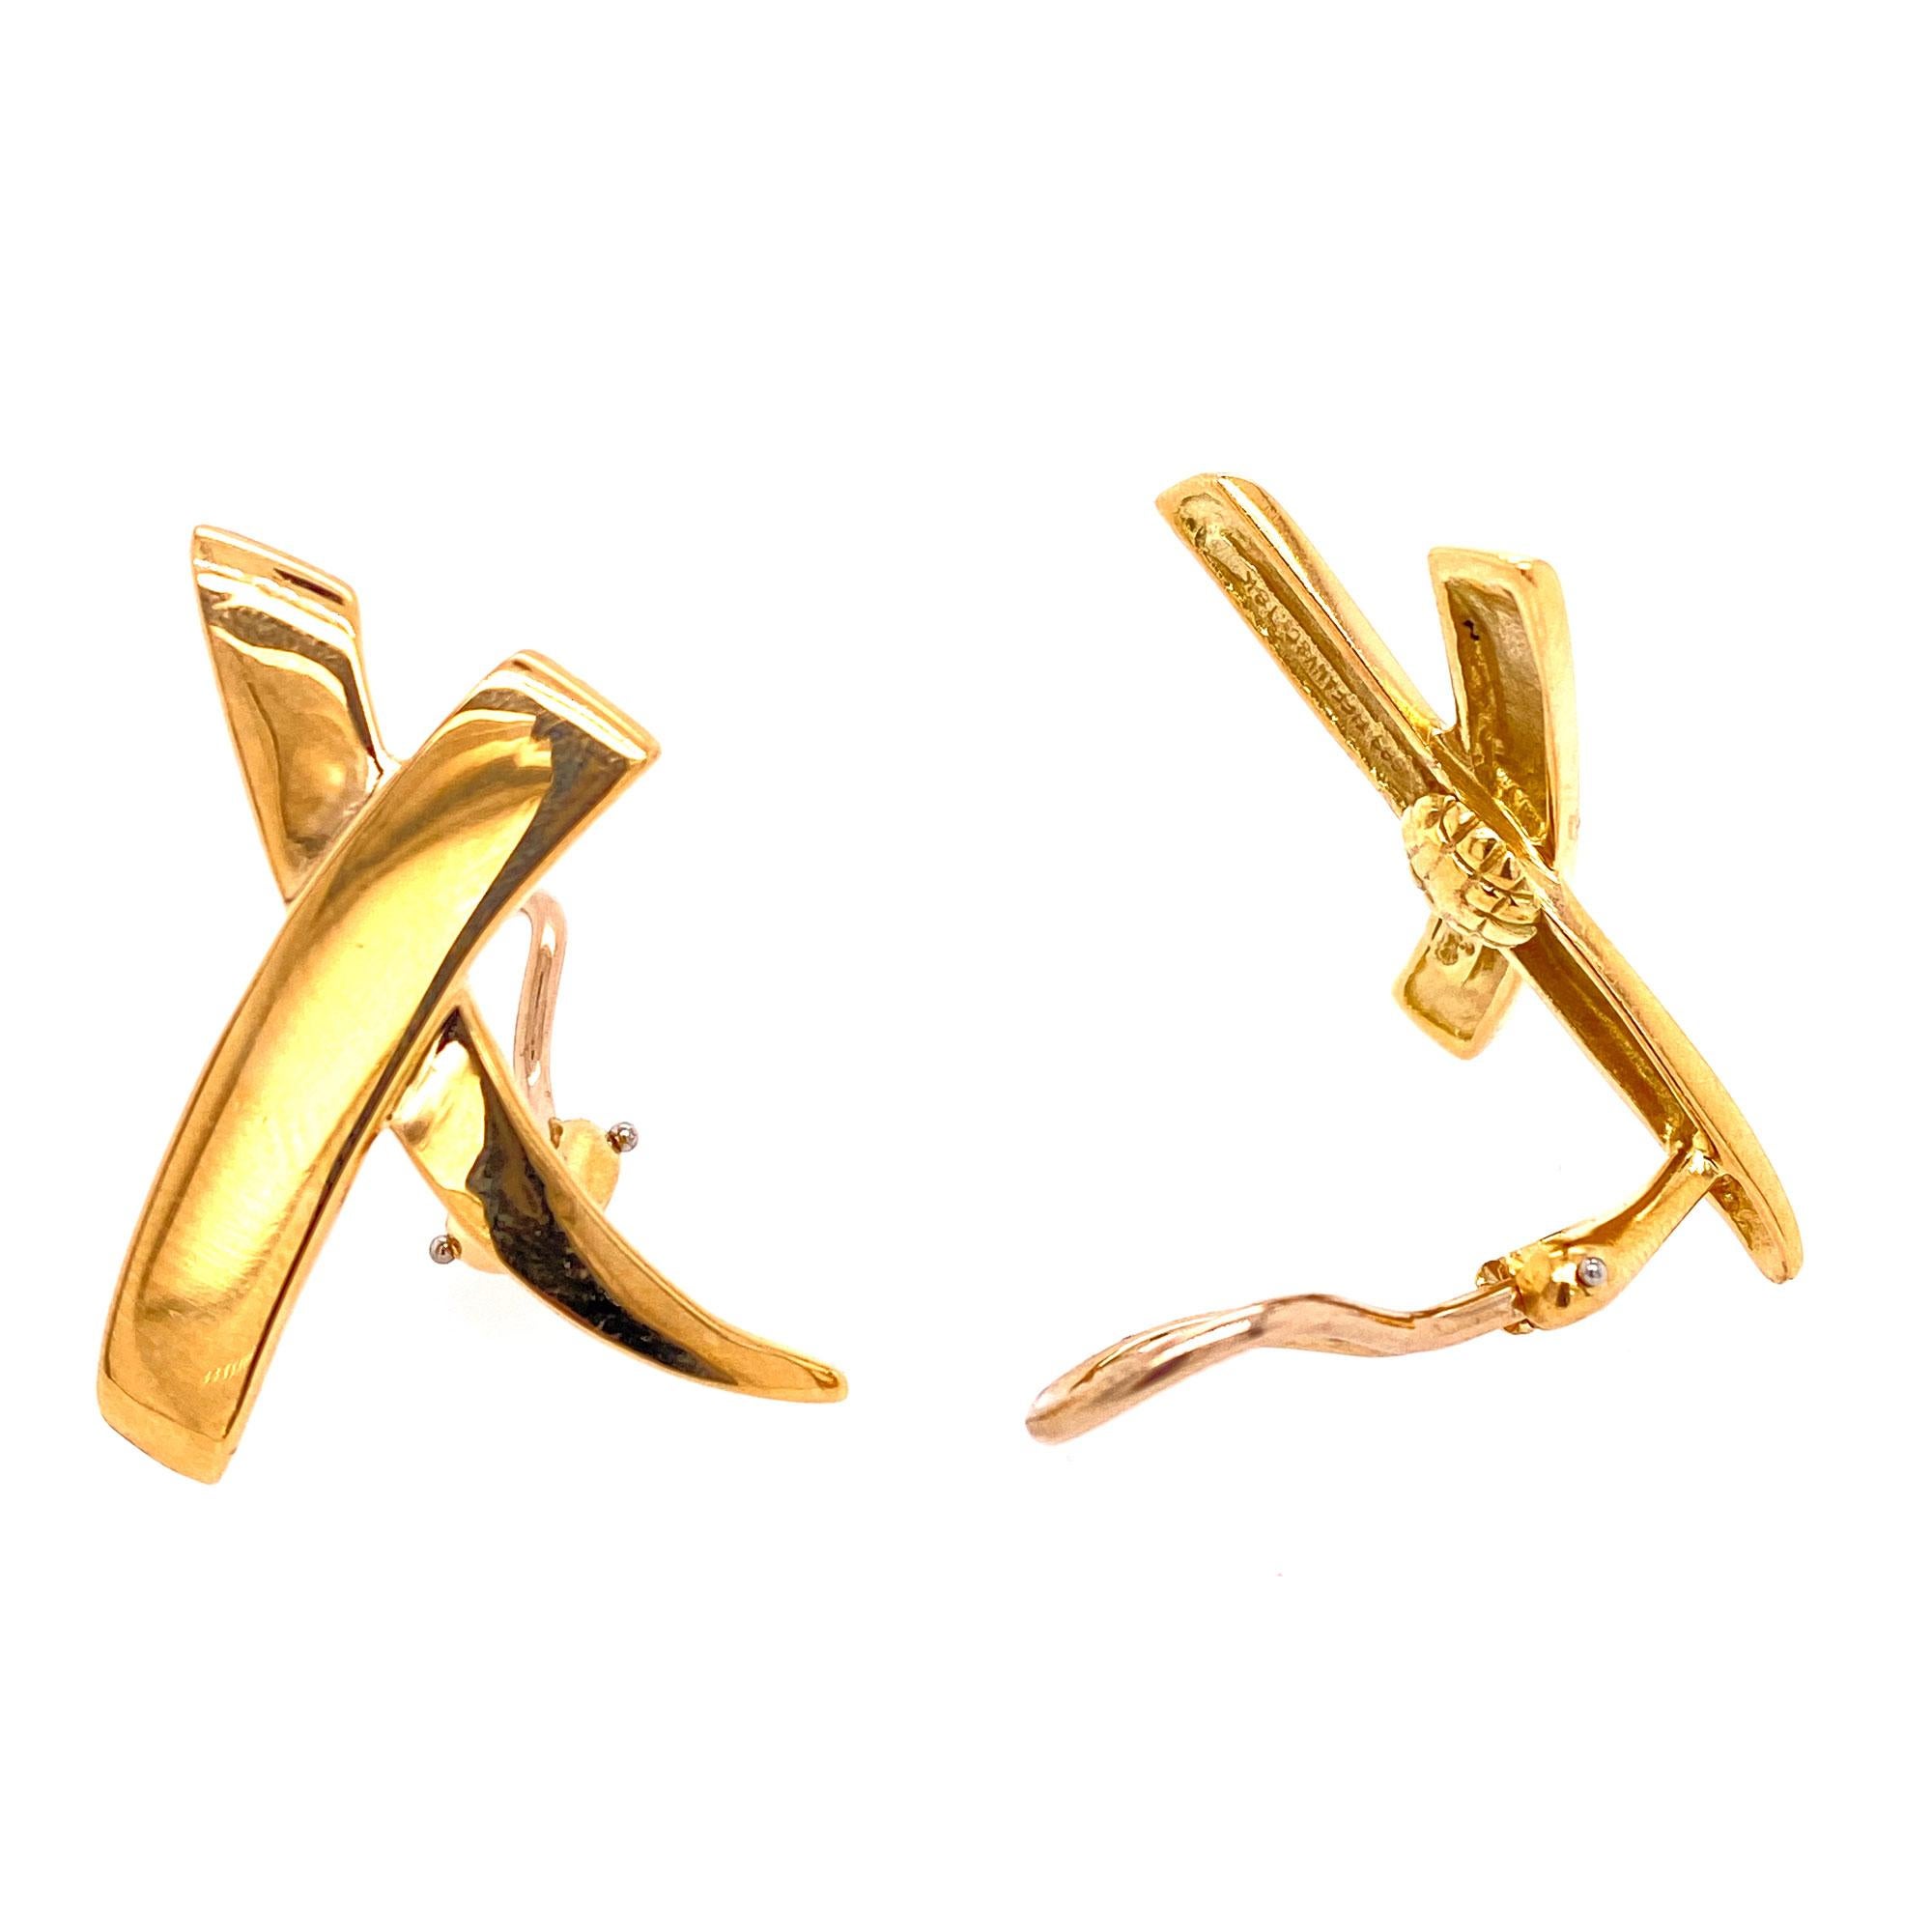 Tiffany & Company large X earrings by designer Paloma Picasso. The earrings are fashioned in 18 karat yellow and gold, measure 1.0 inch in length and .50 inches in width. Signed Paloma Picasso and Tiffany & Co. 18k. 
Clip backs. 
